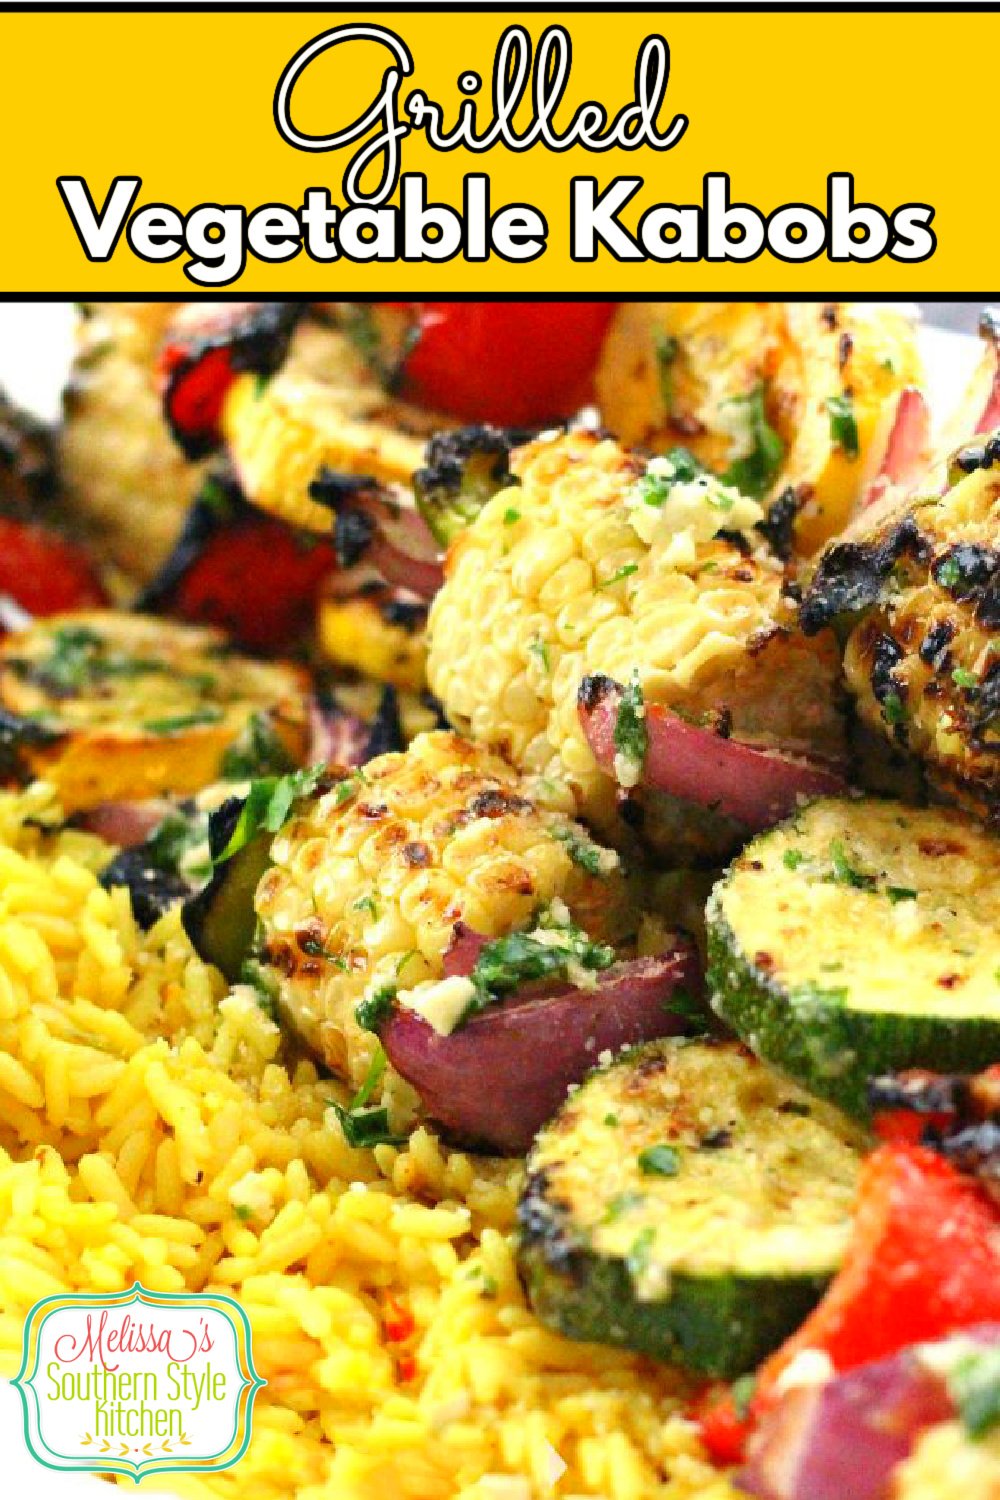 Farm to table flavors shine in these grilled vegetable kabobs brushed with a garlic herb butter #vegetables #vegetablekabobs #vegetarian #vegetablerecipes #southernfood #southernrecipes #corn #grilledcorn #kabobs #grilling #grilledvegetables #sidedishrecipes via @melissasssk